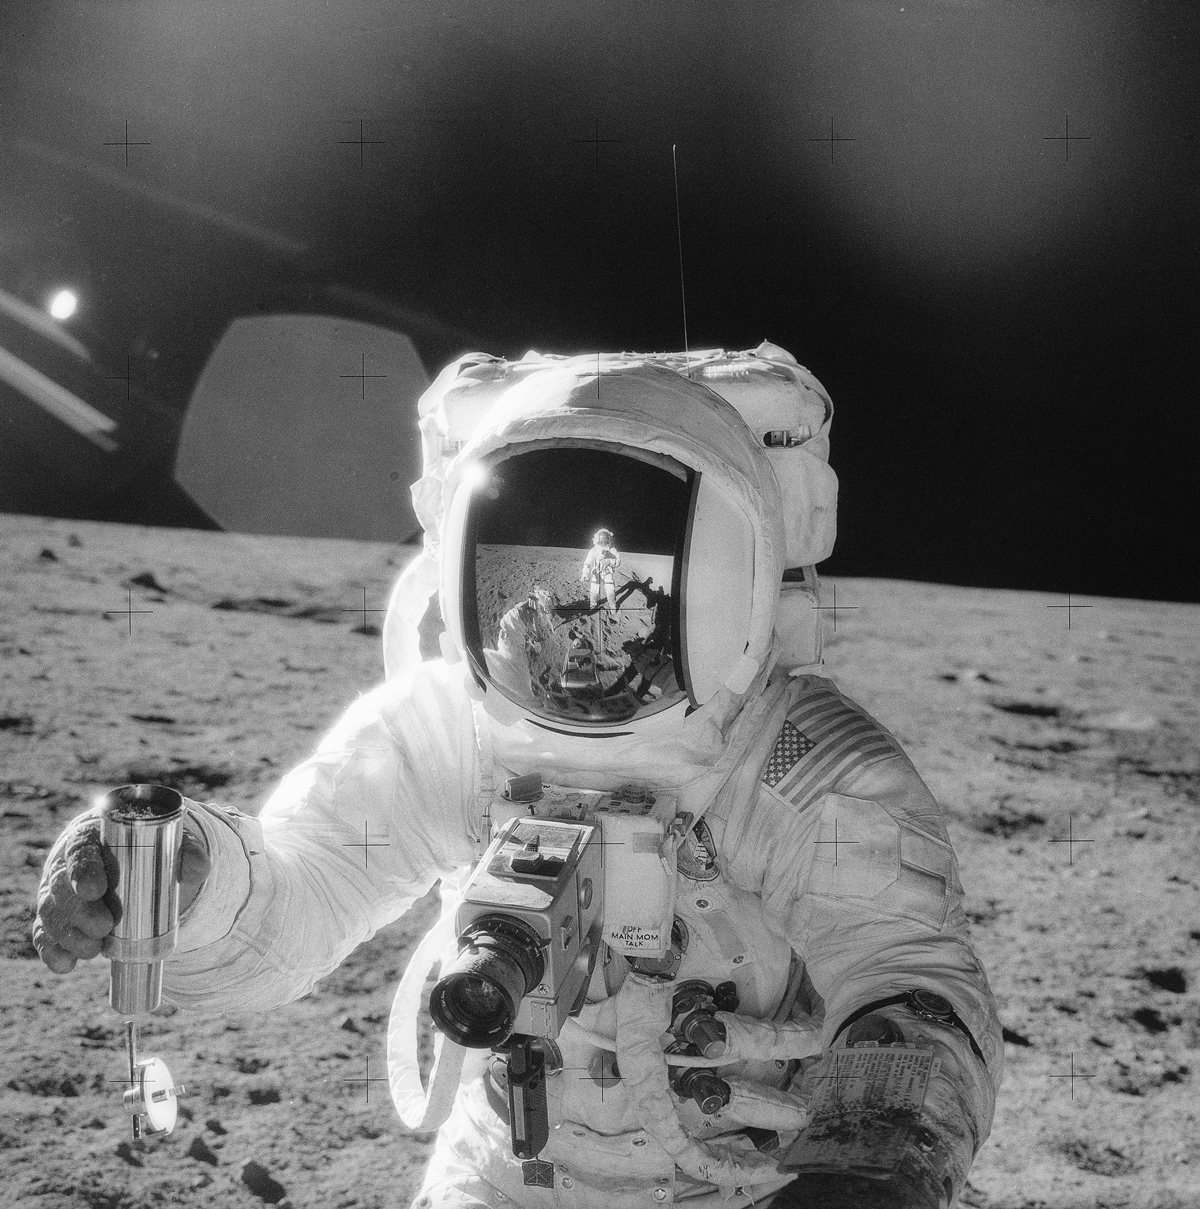 Astronaut collecting samples on the Moon